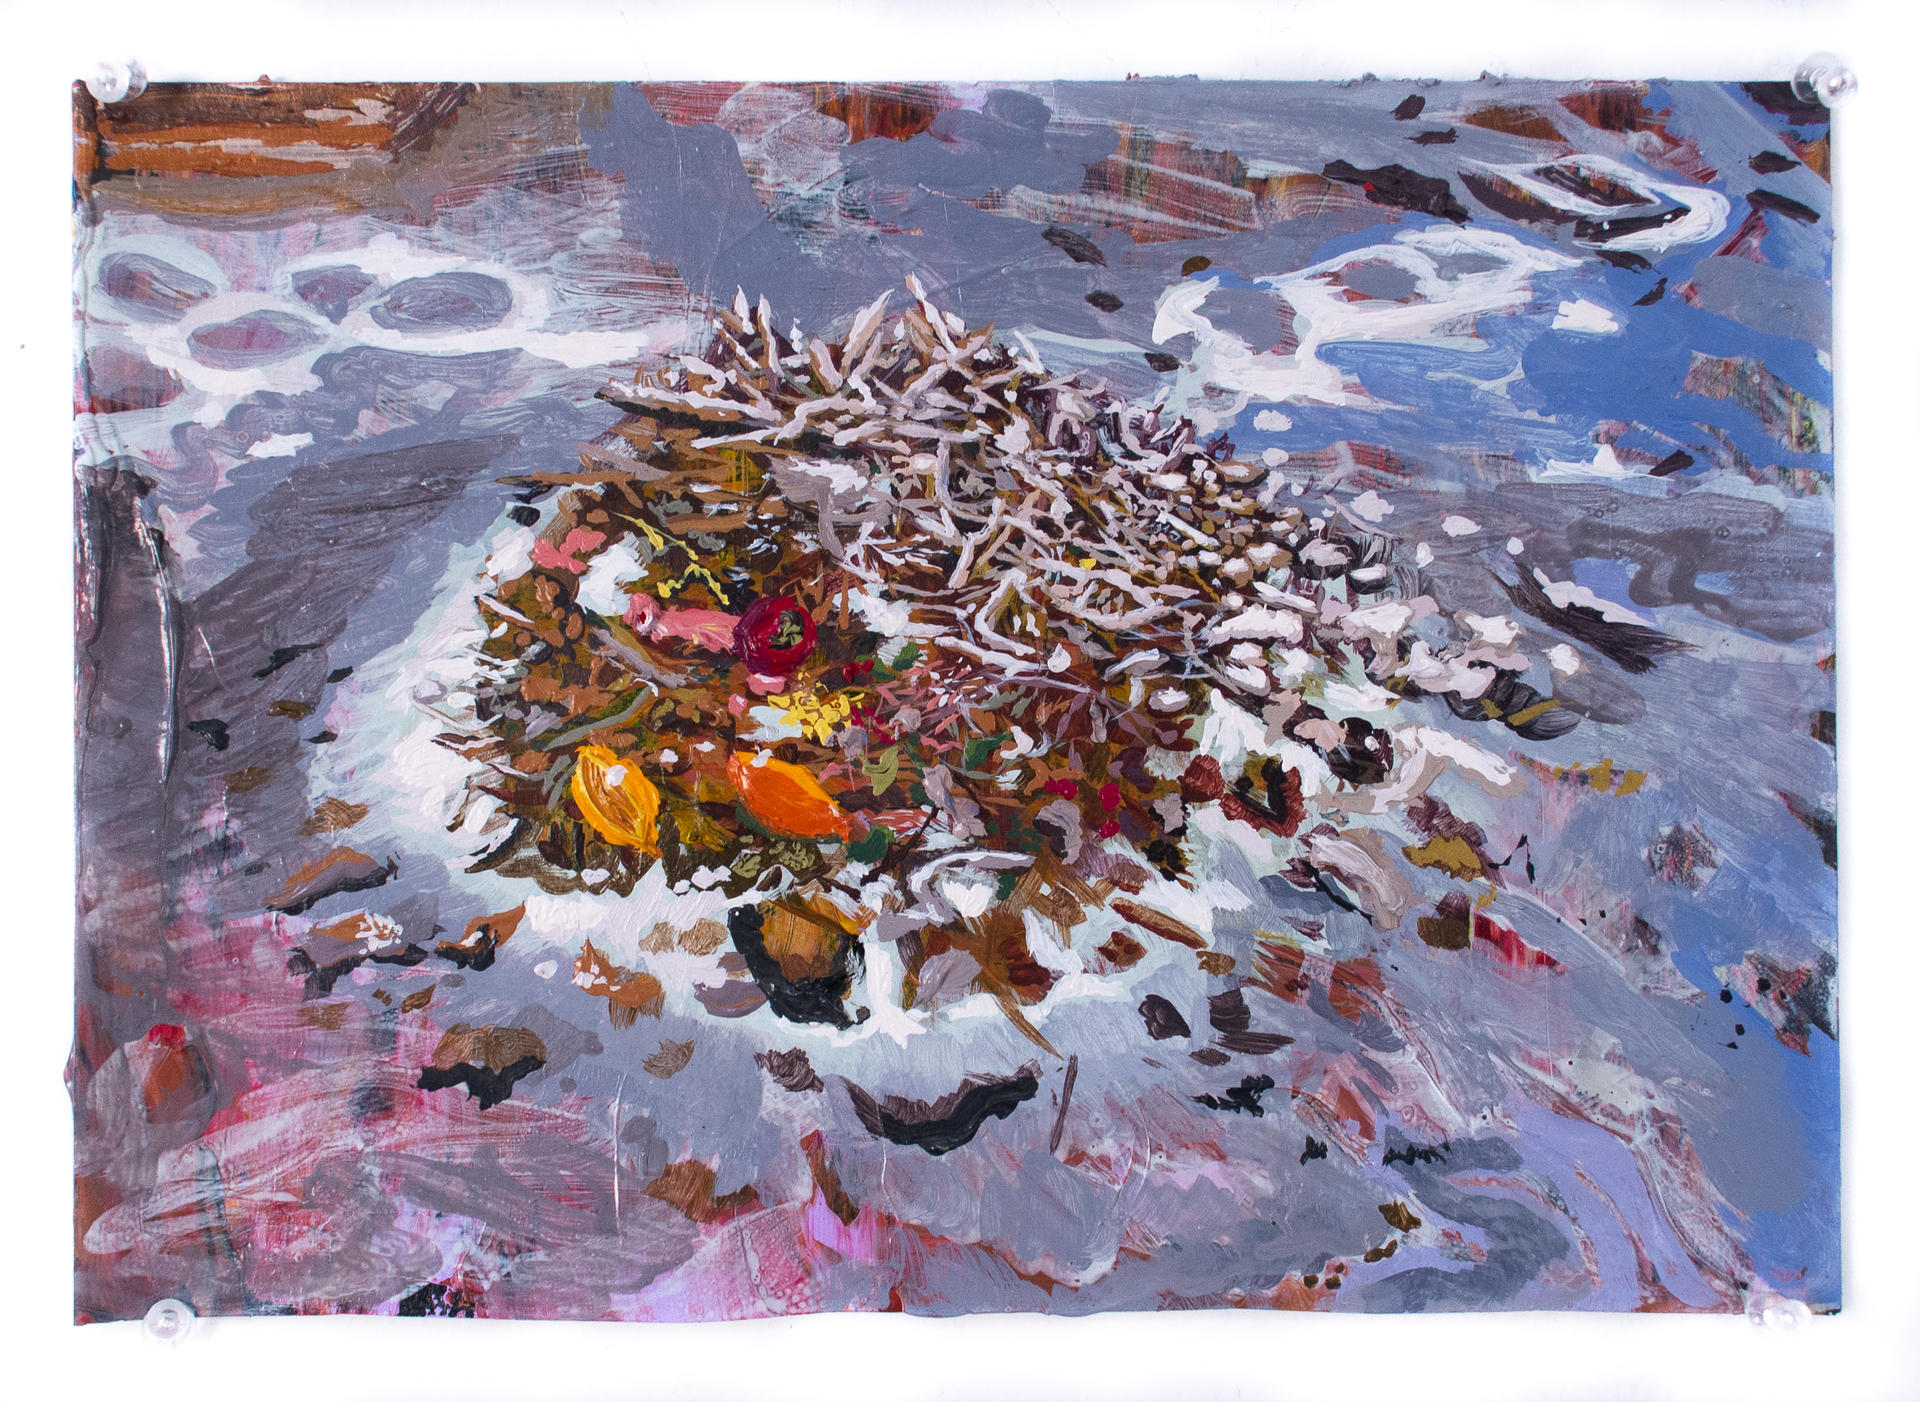 Painting of a compost pile covered in frost